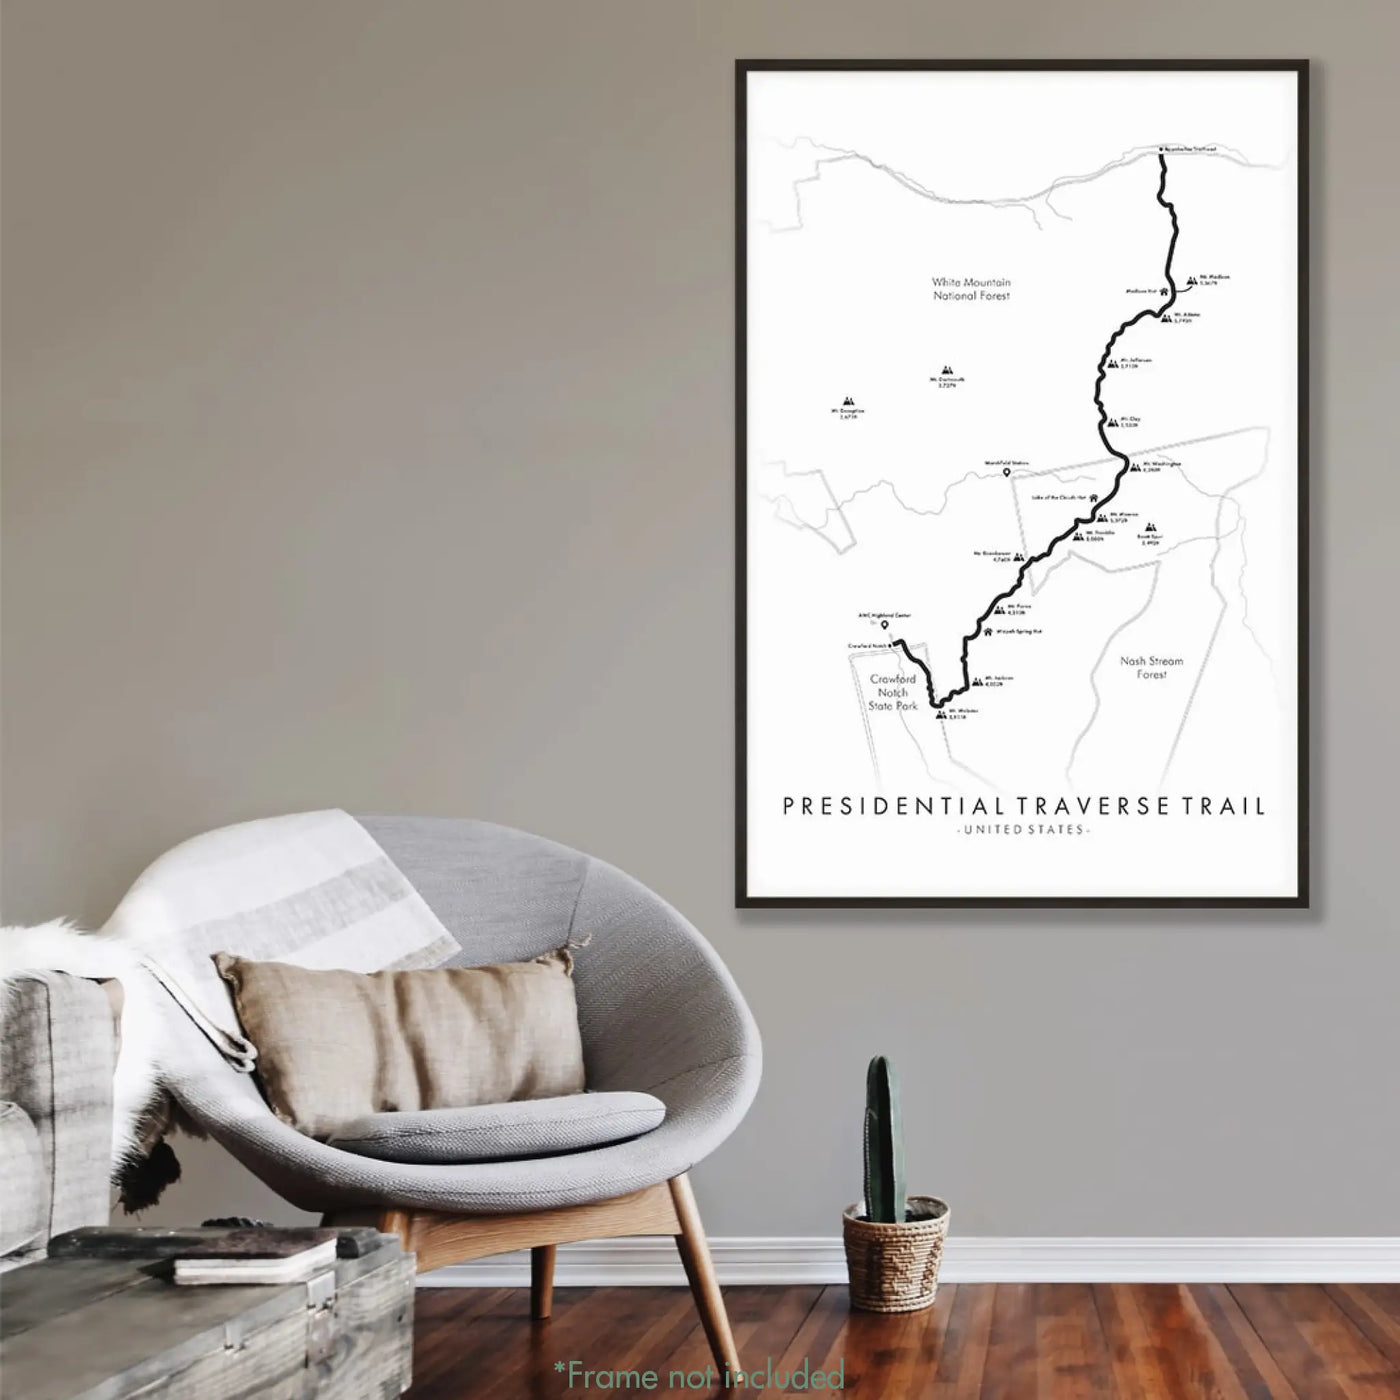 Trail Poster of Presidential Traverse Trail - White Mockup